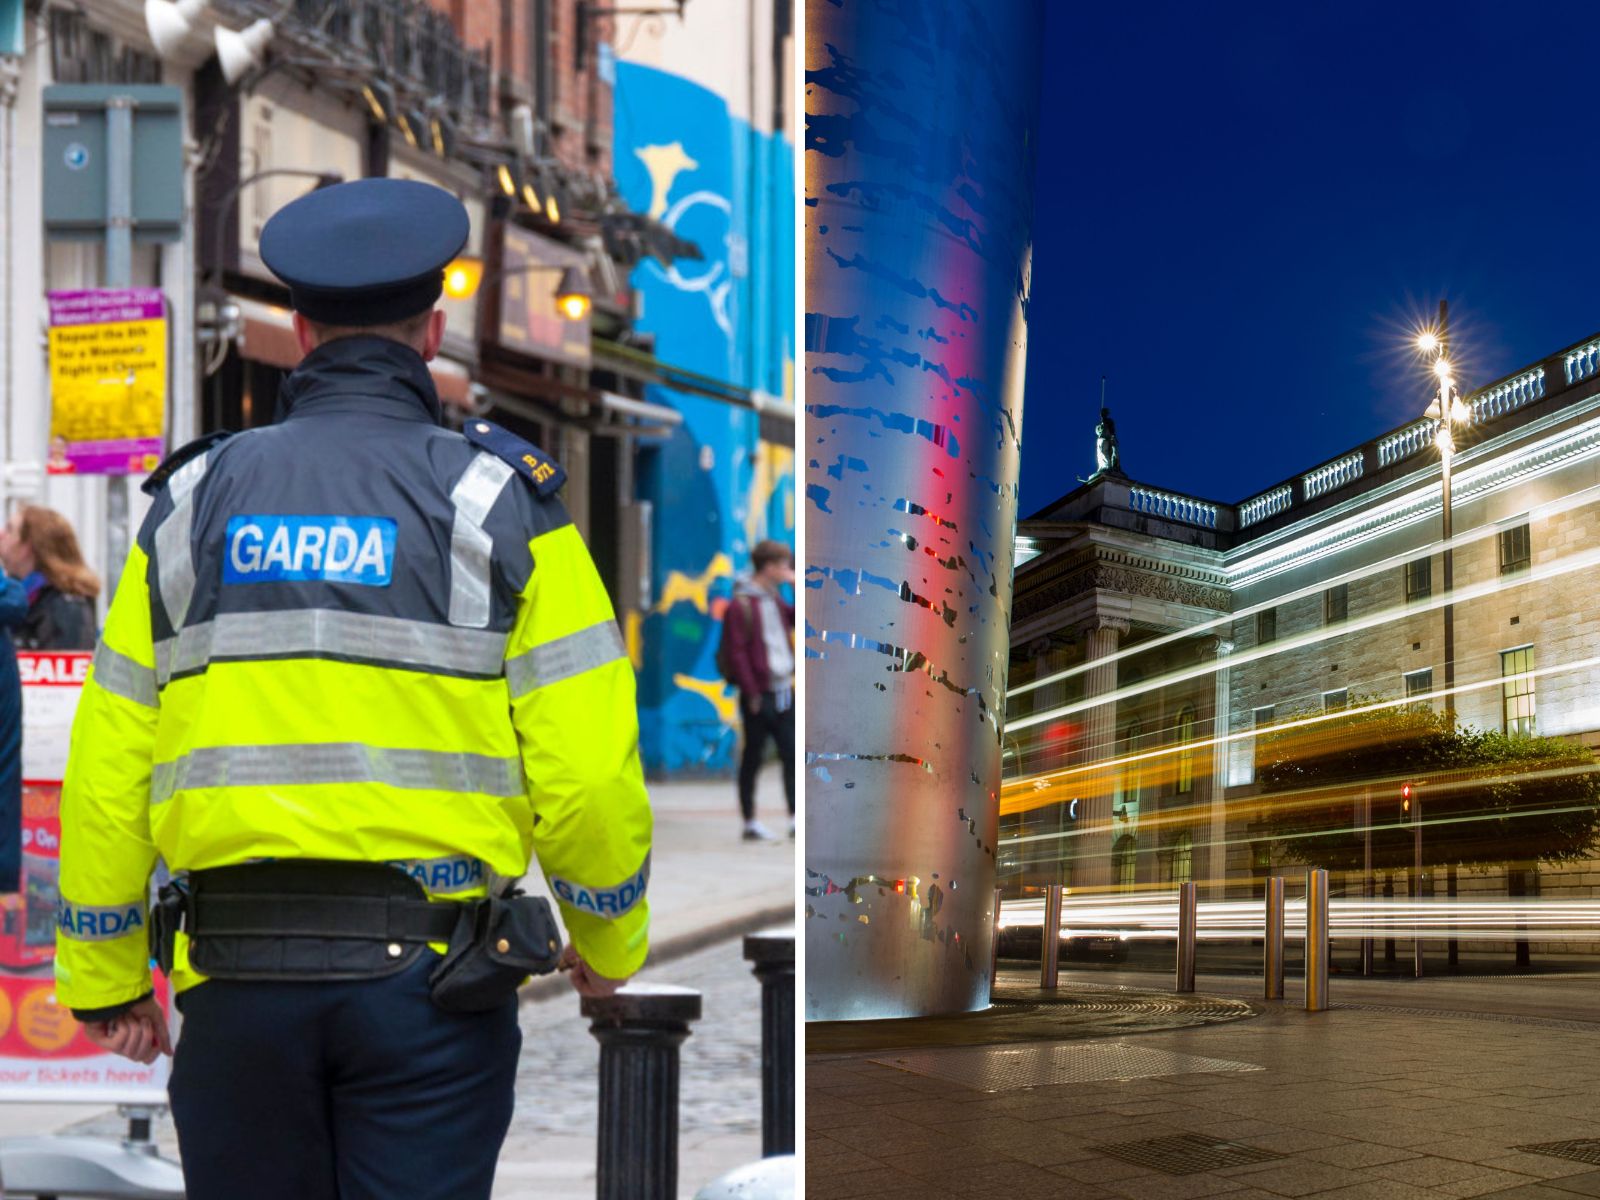 Split-screen image shows a Garda on patrol in Dublin, and the GPO on O'Connell Street